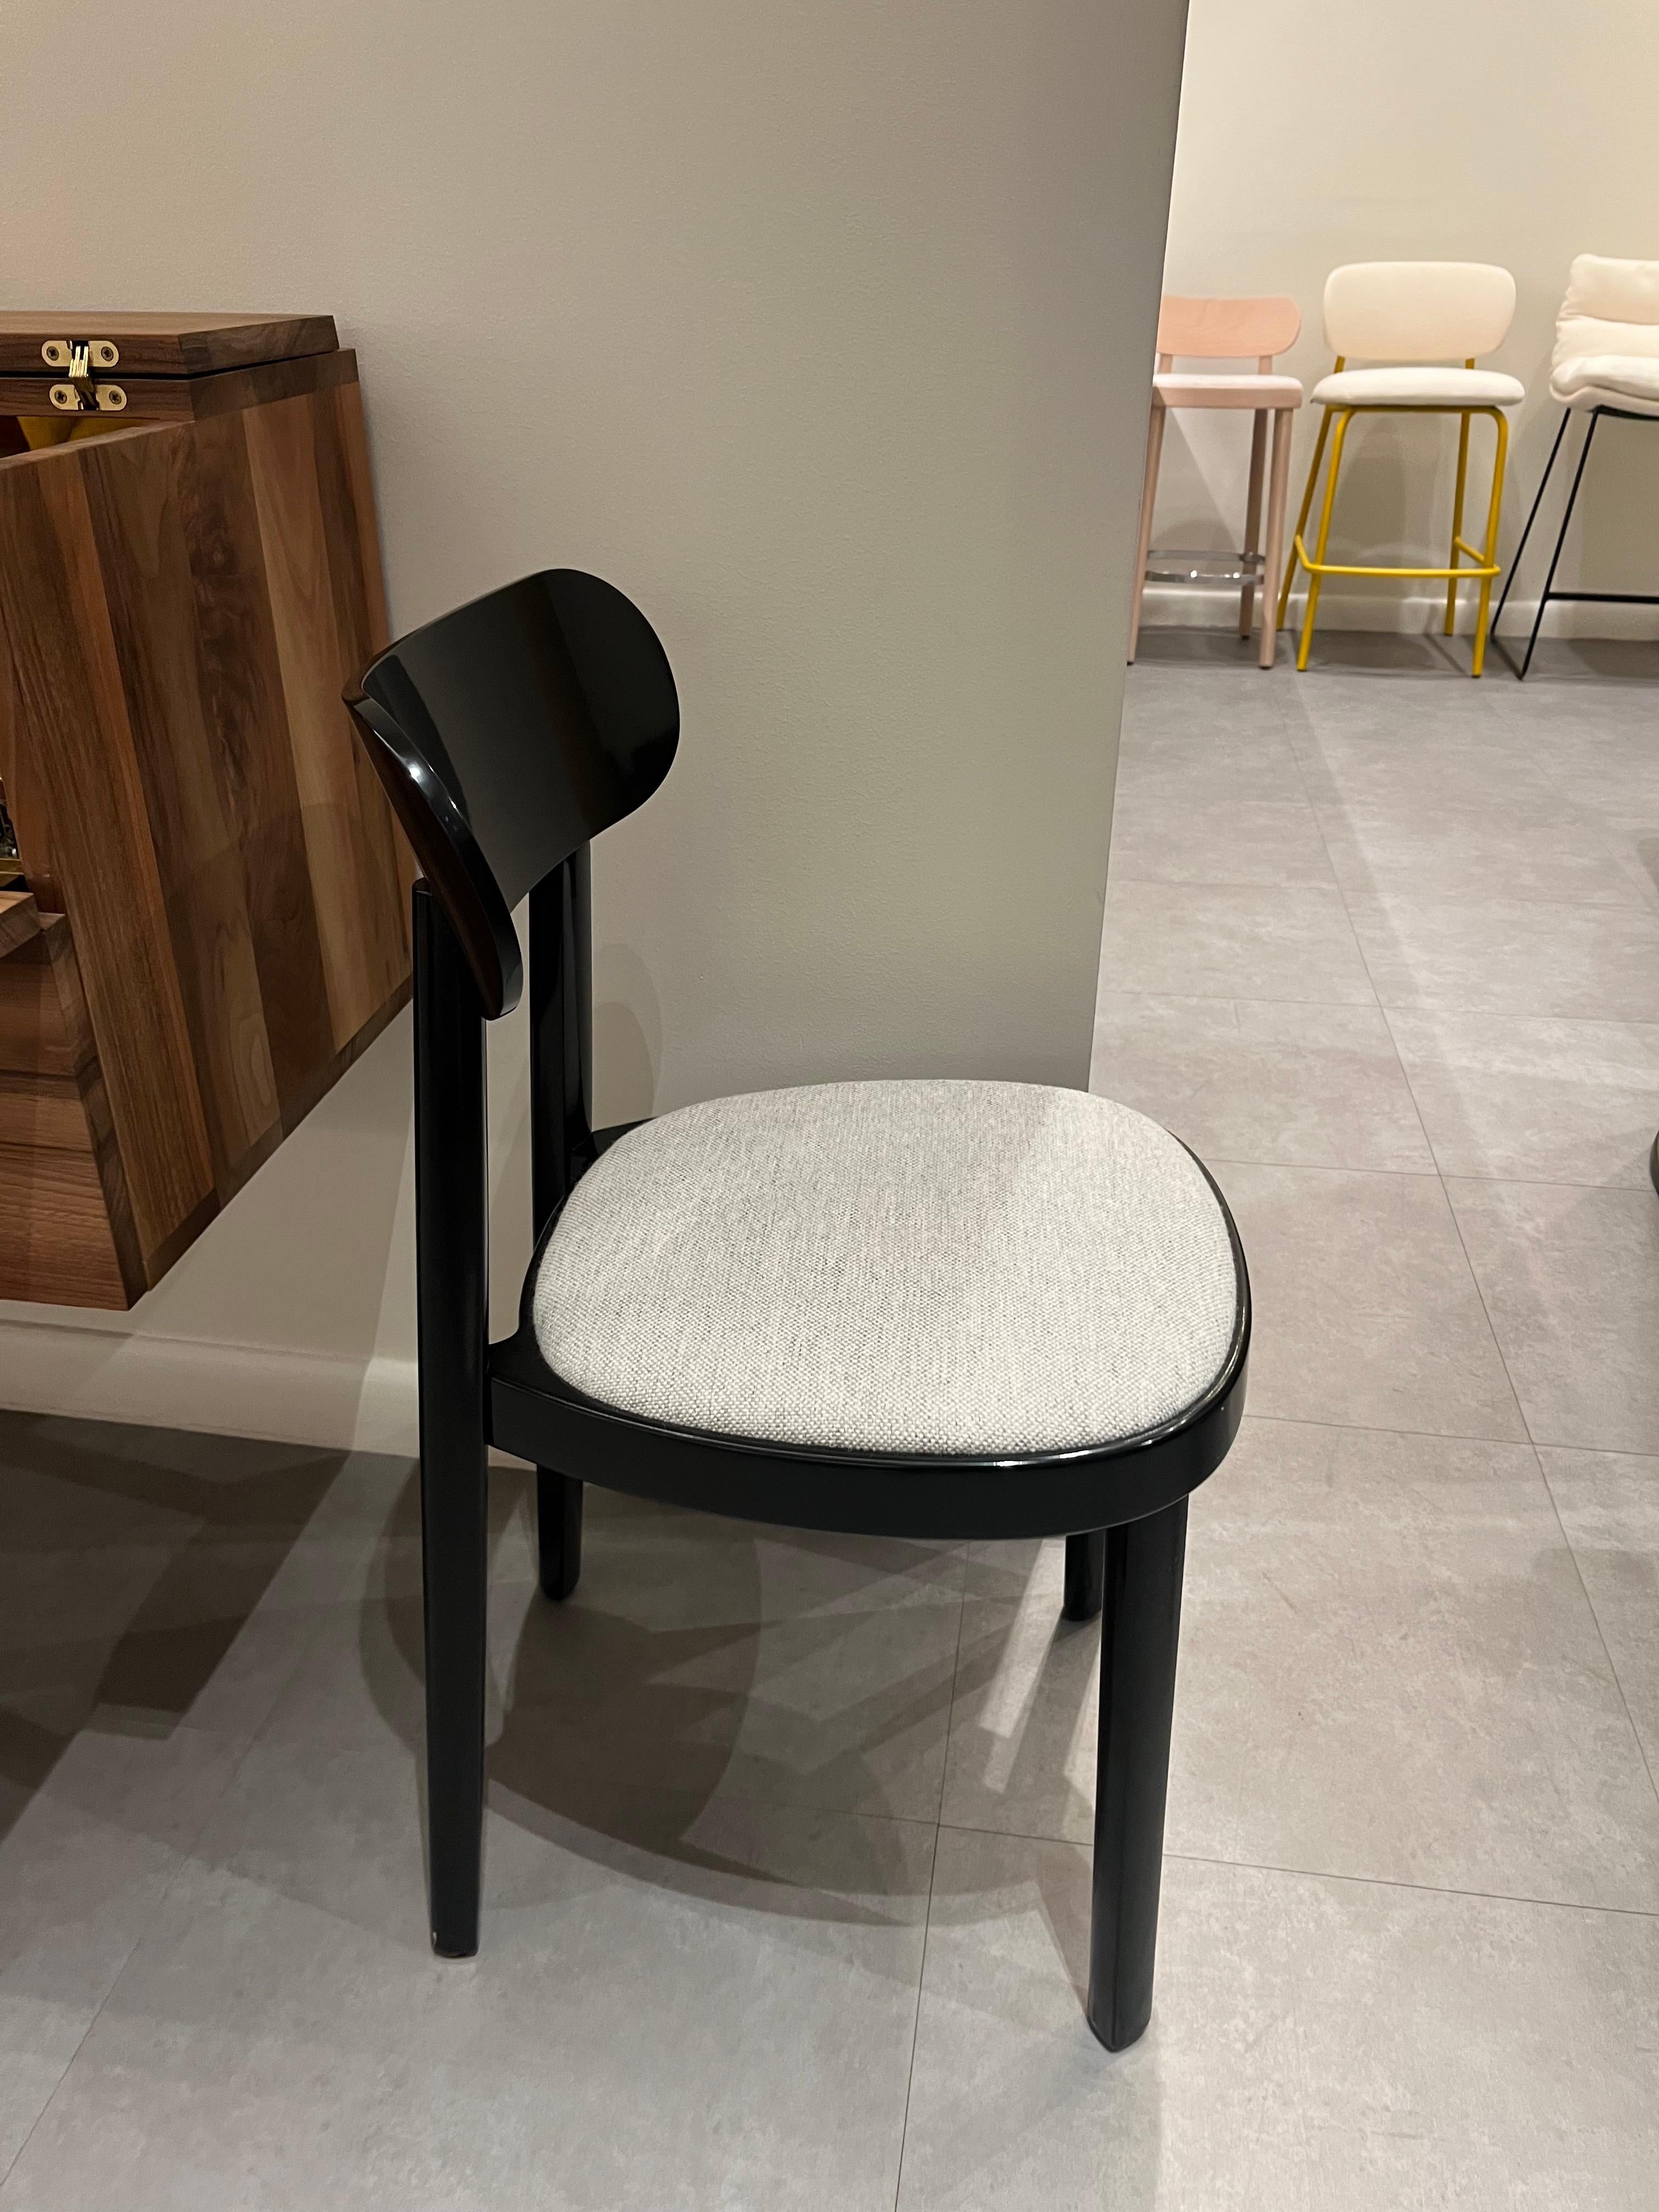 118 SP – High Gloss upholstered wooden
Frame: beech high gloss lacquered black
Fabric: Hallingdal 65 110 whiter-grey
mélange
plastic glides
Minimalistic and honest, at the same time elegant and filigree
Minimalistic and honest, at the same time